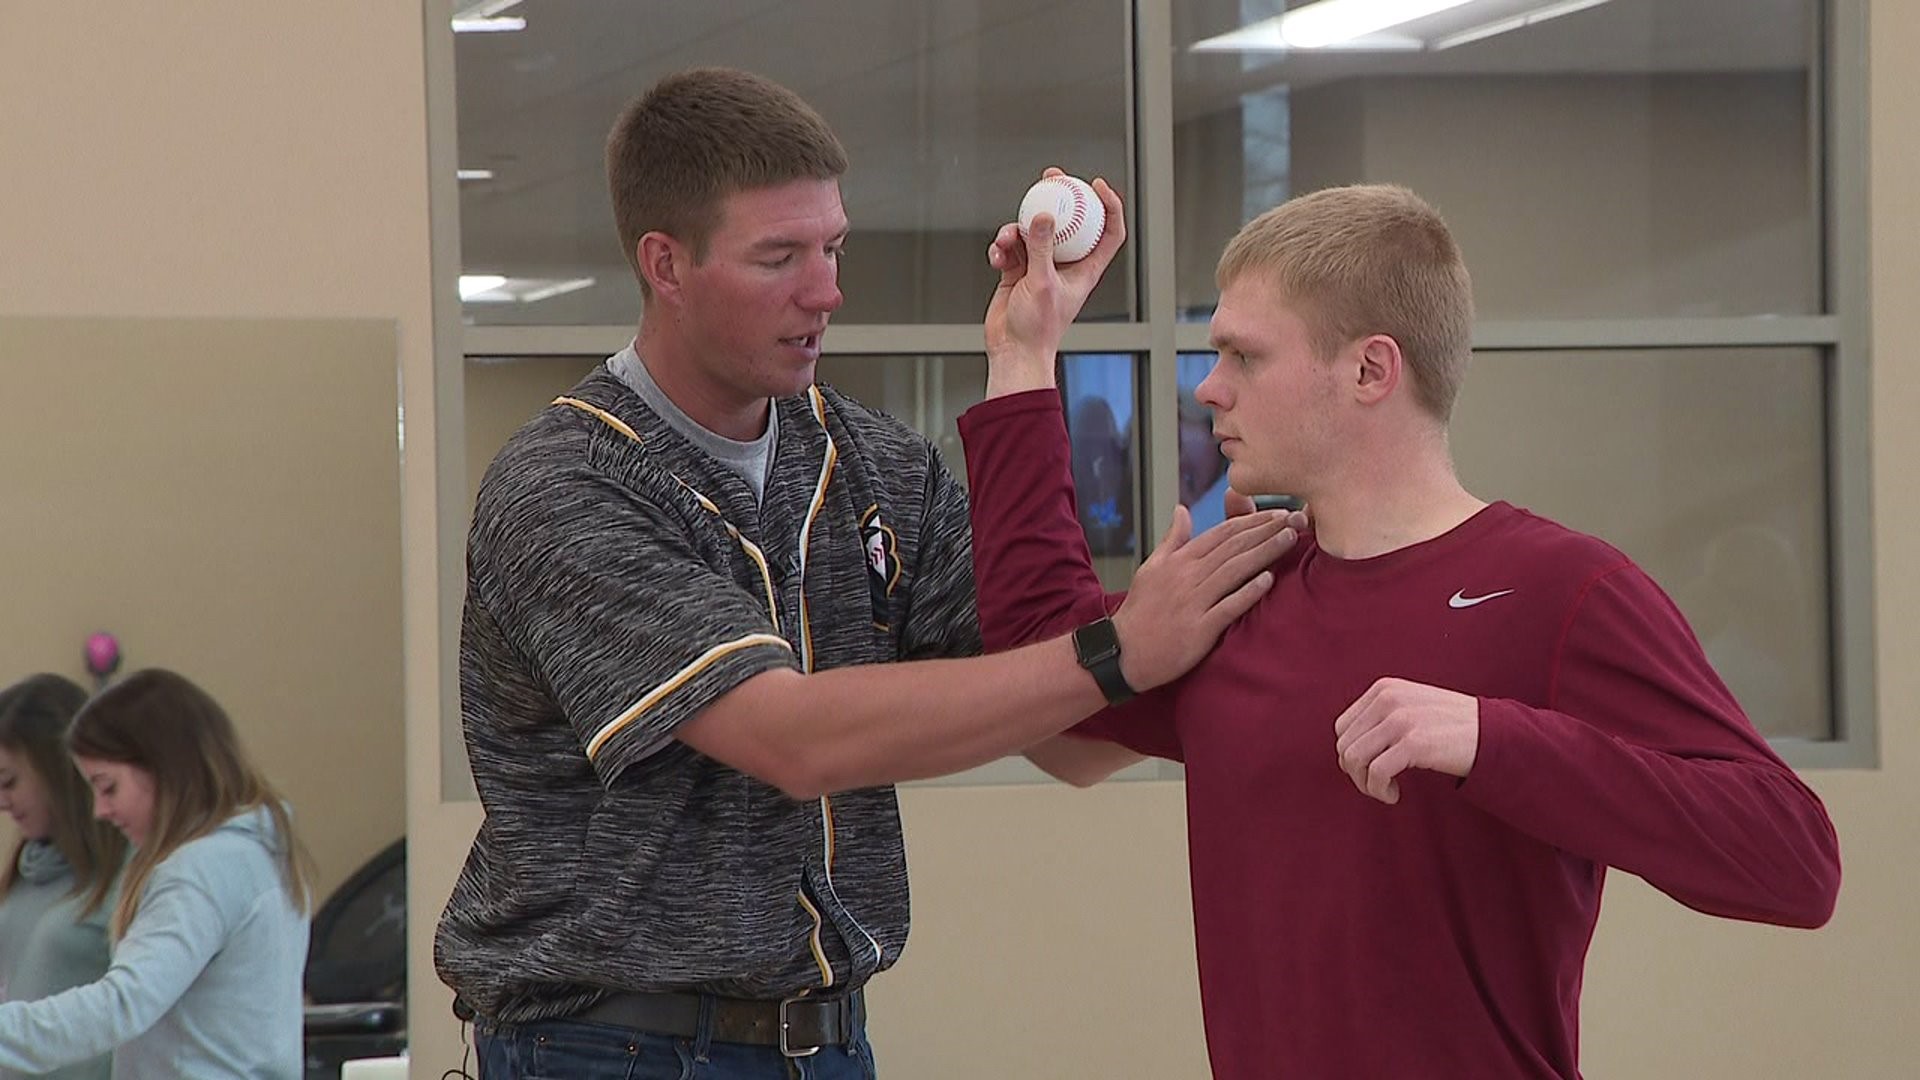 Let`s Move Quad Cities makes a pitch to prevent throwing injuries